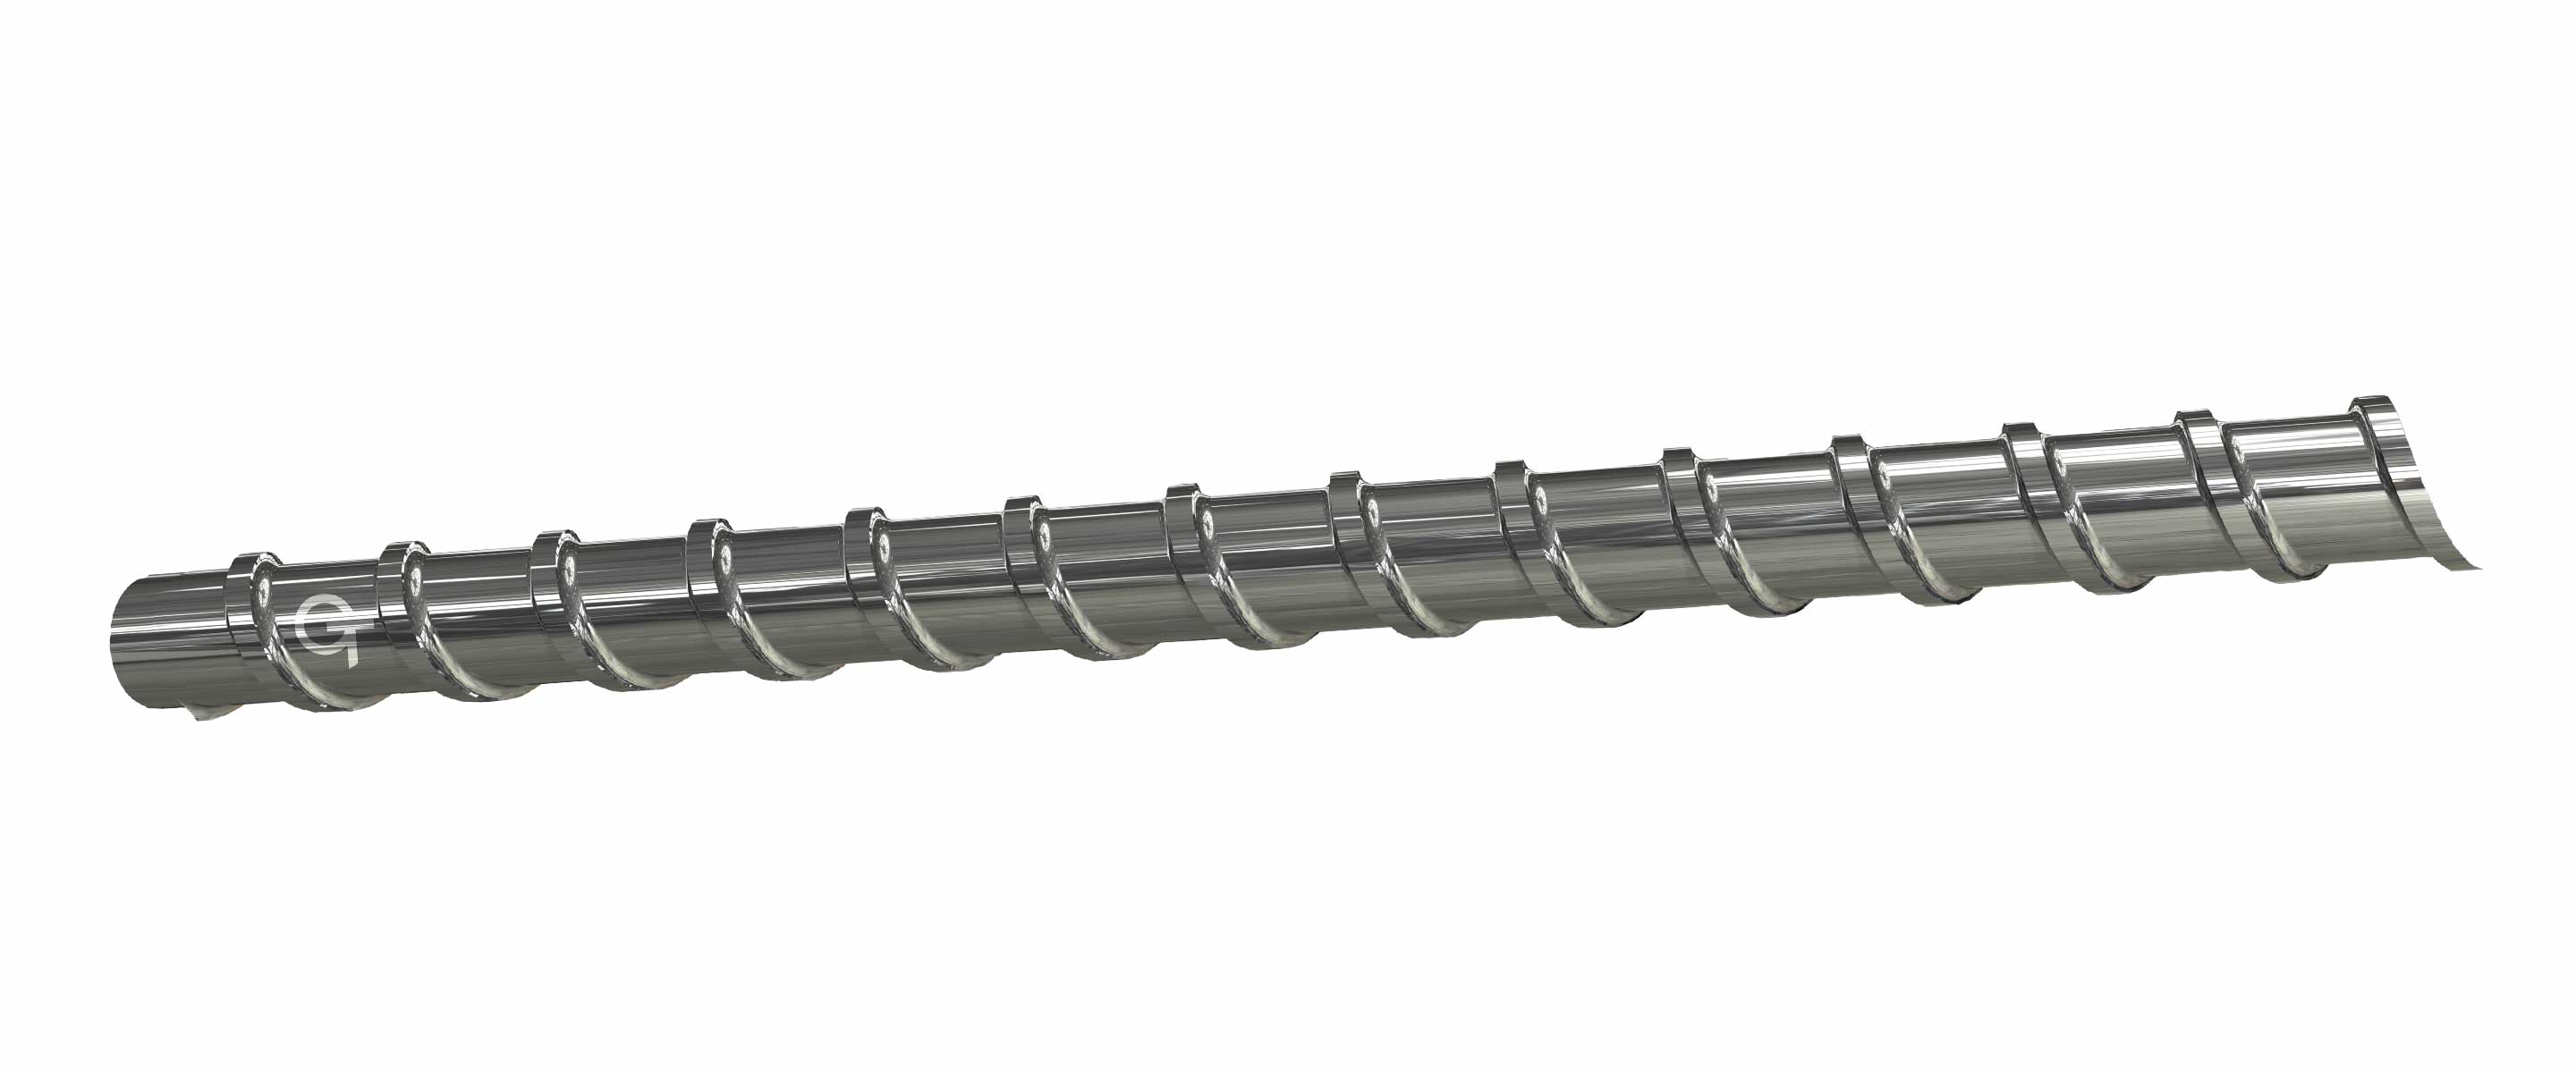 The LSR screw works like a dosing screw, but has a special geometry.